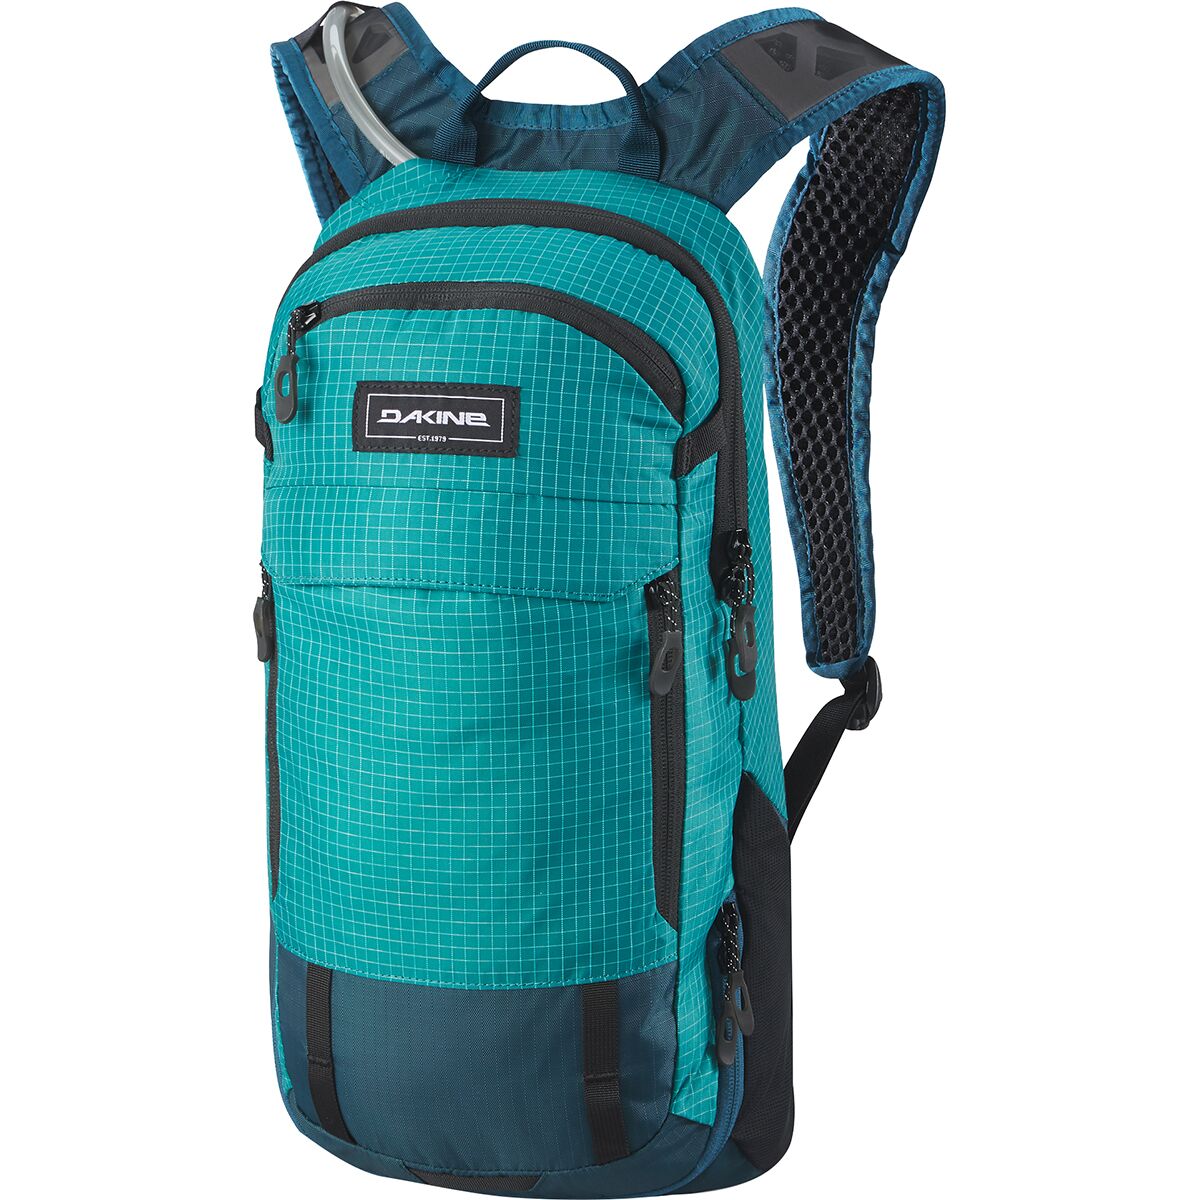 DAKINE Syncline 12L Hydration Pack - Women's Deep Lake, One Size